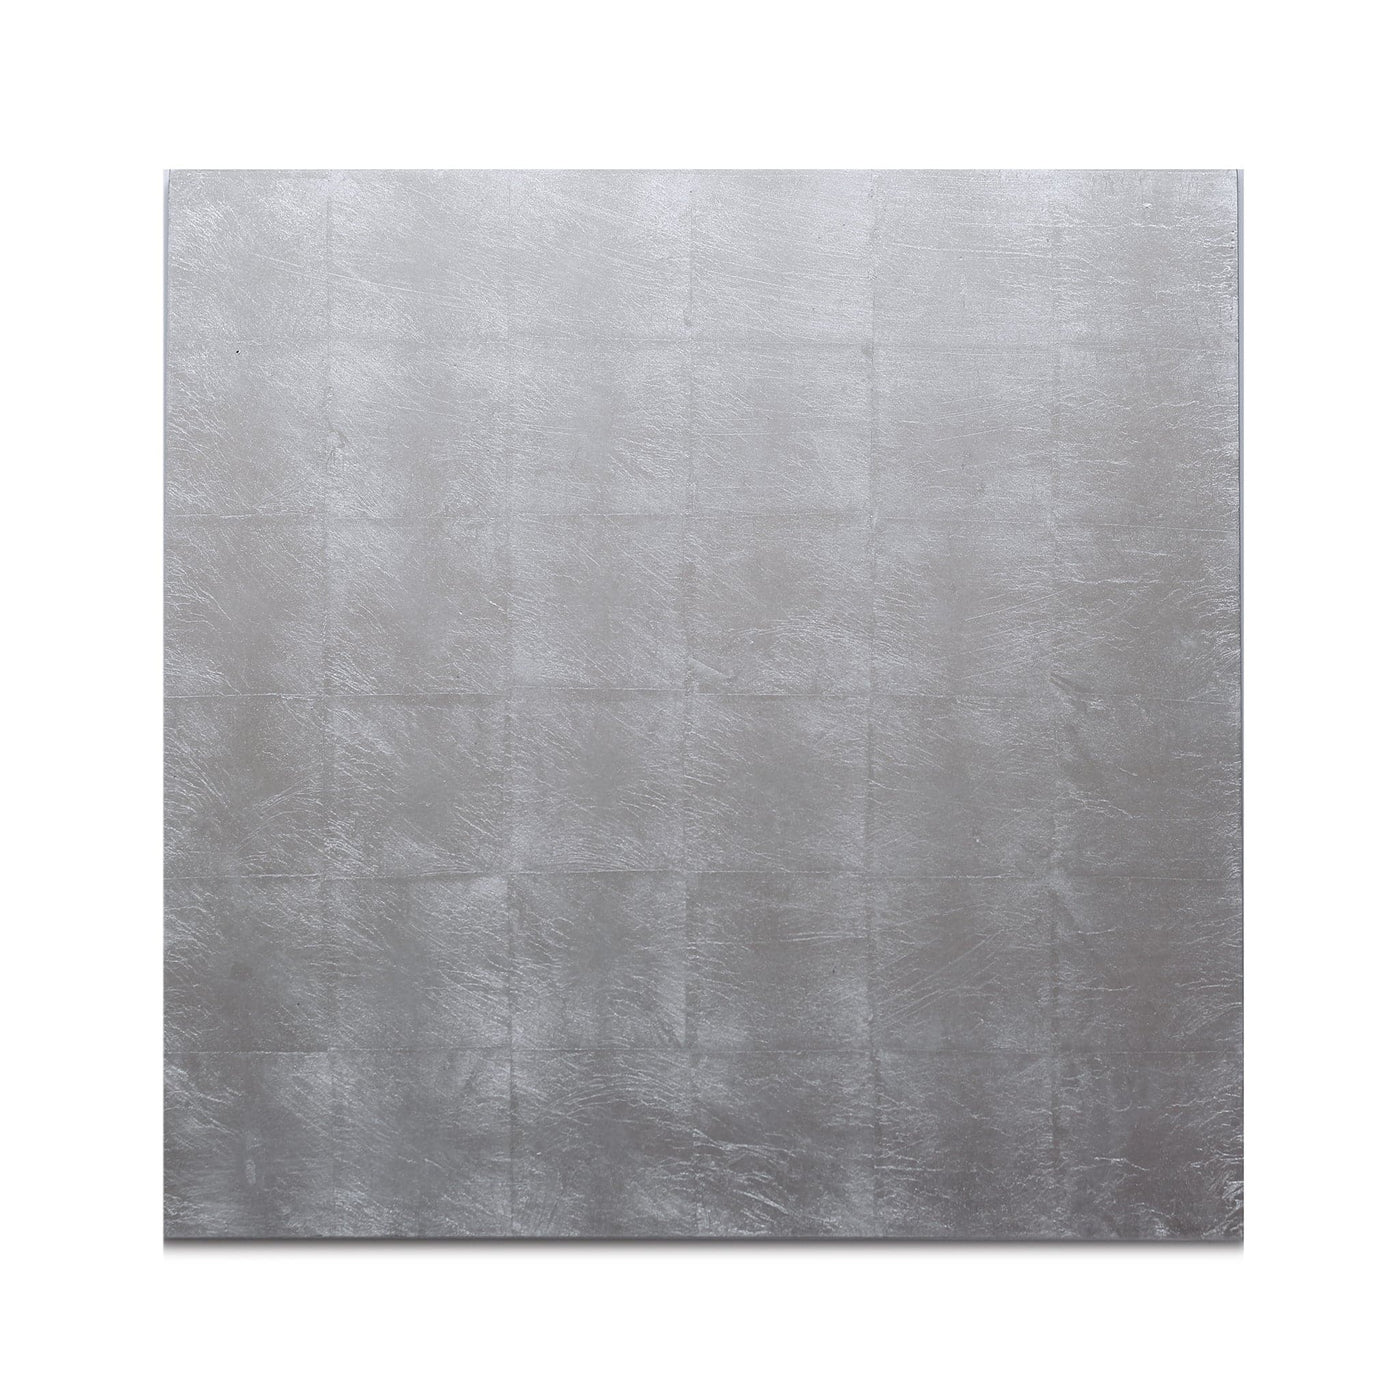 Silver Leaf Matte Chic Placemat Silver - Posh Trading Company  - Interior furnishings london